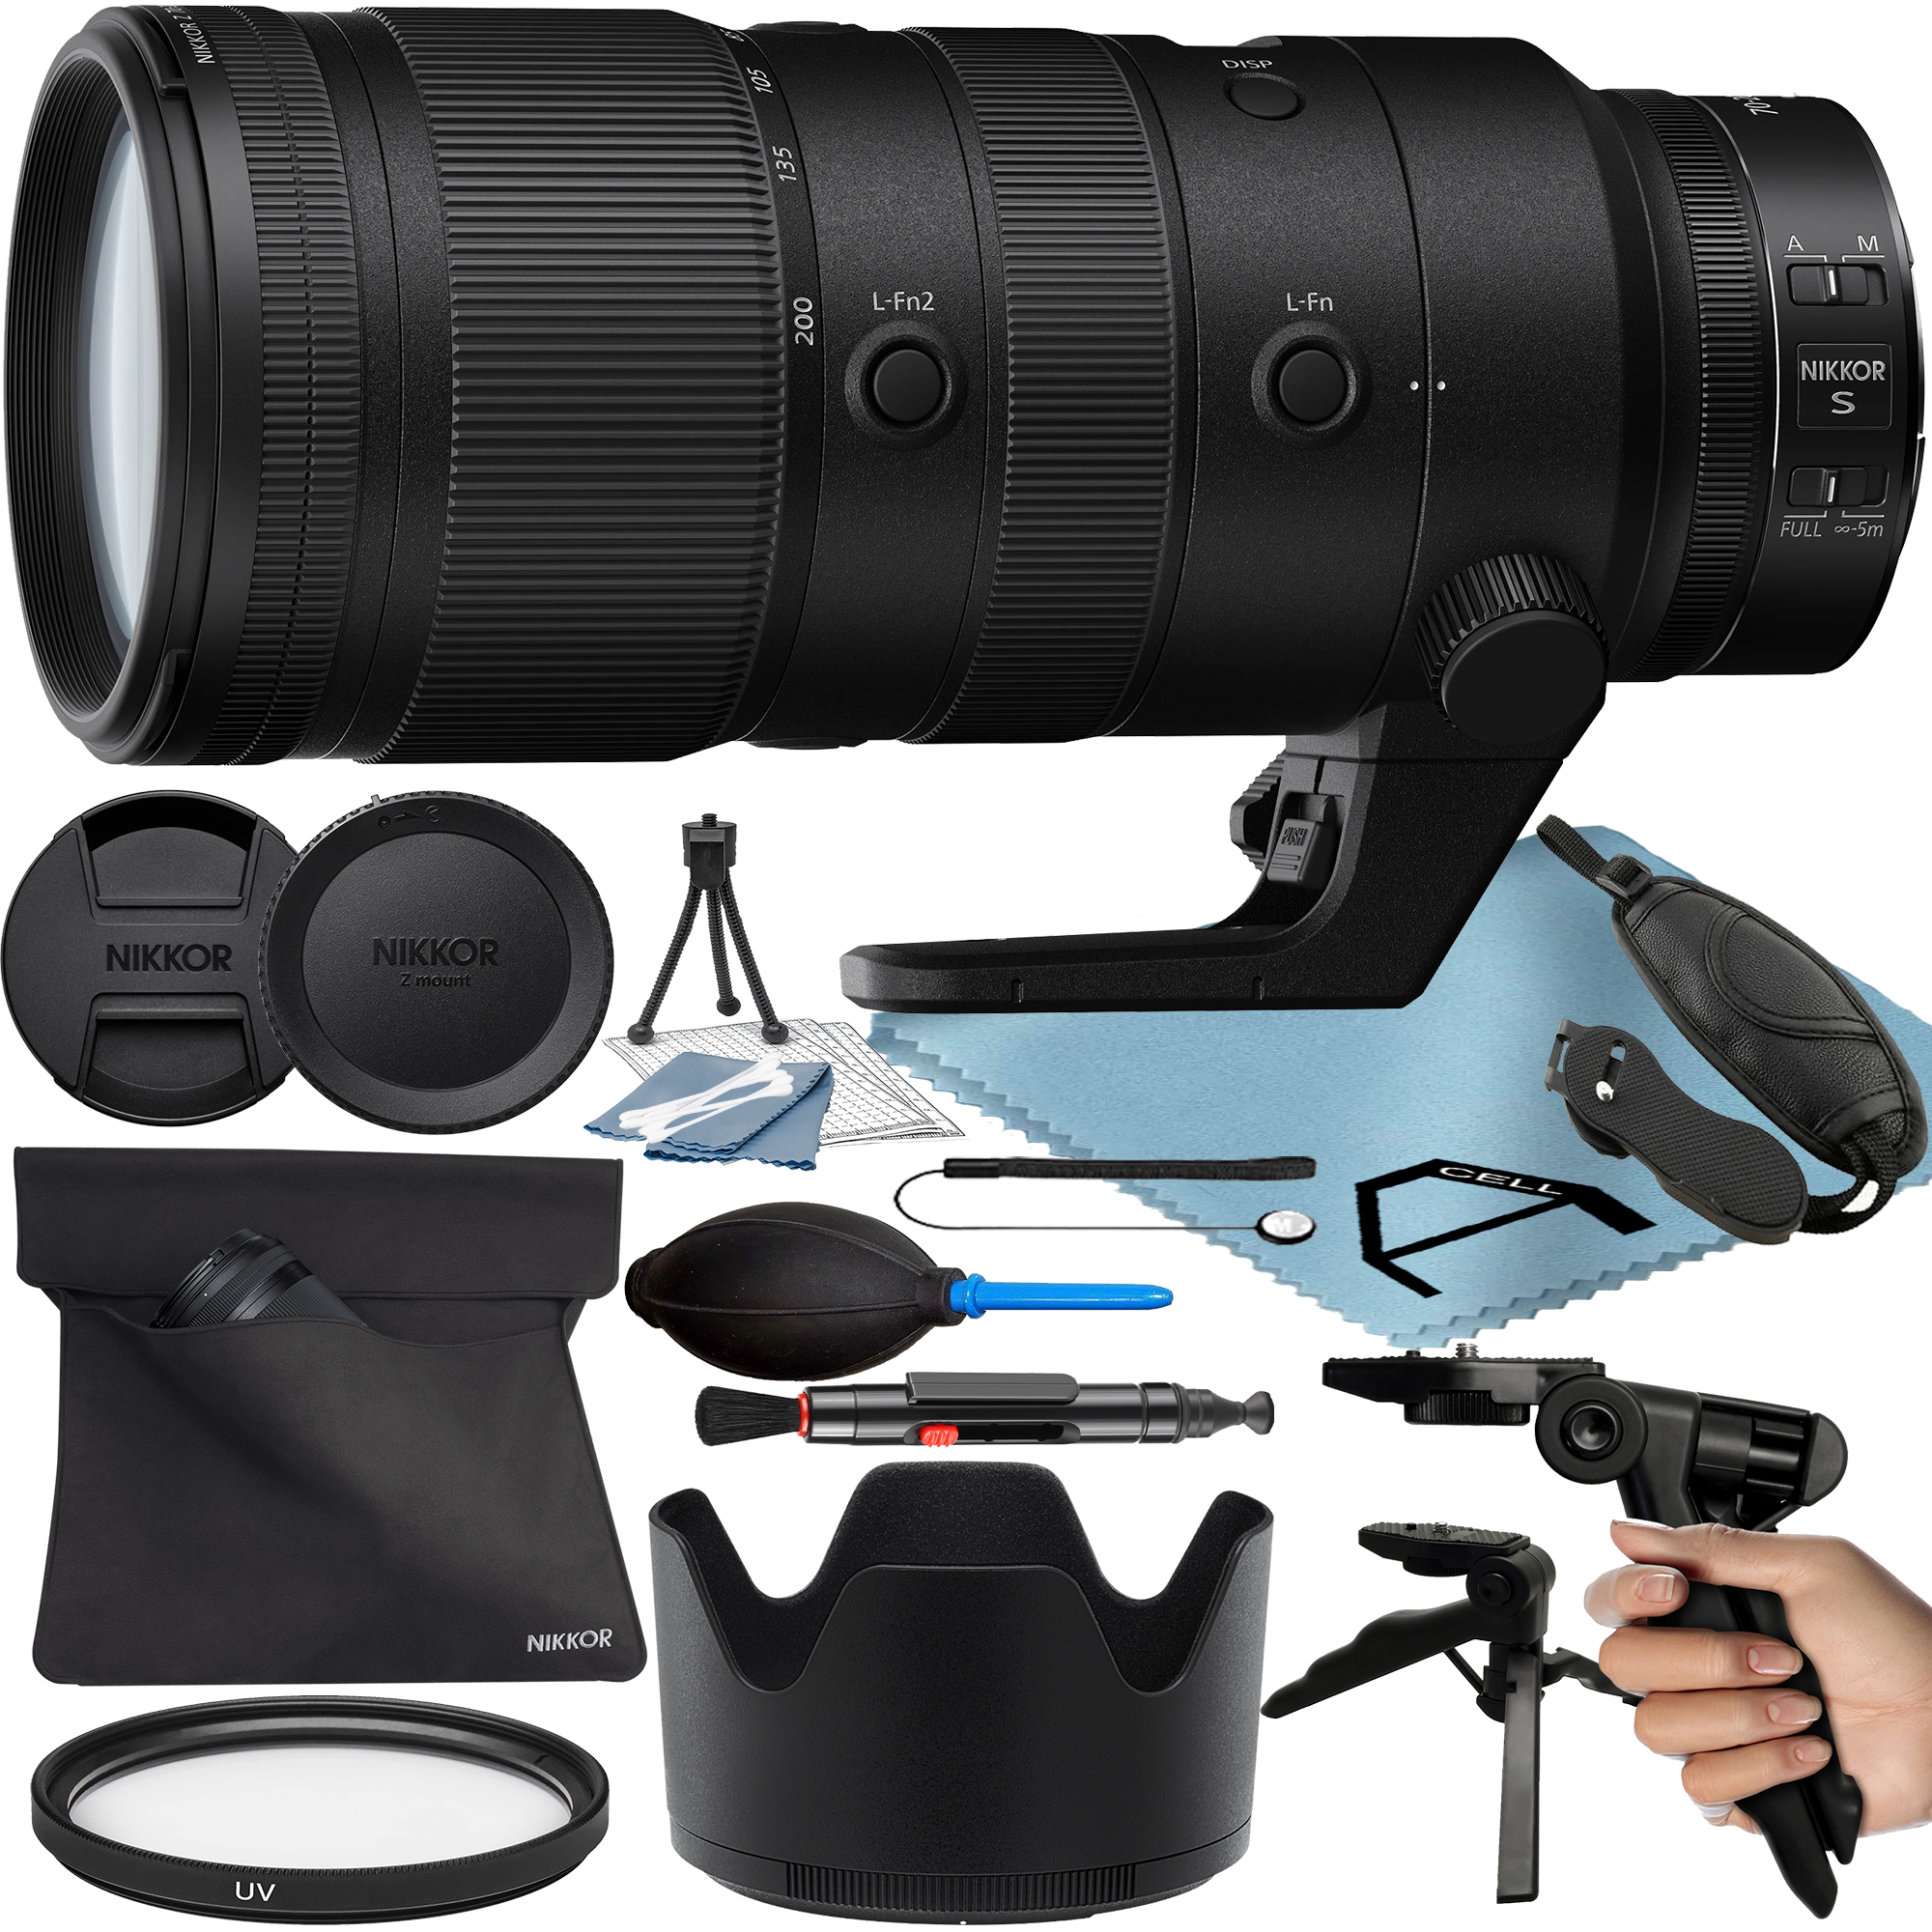 Nikon NIKKOR Z 70-200mm F/2.8 VR S Lens with Tripod + UV Filter + A-Cell Accessory Bundle